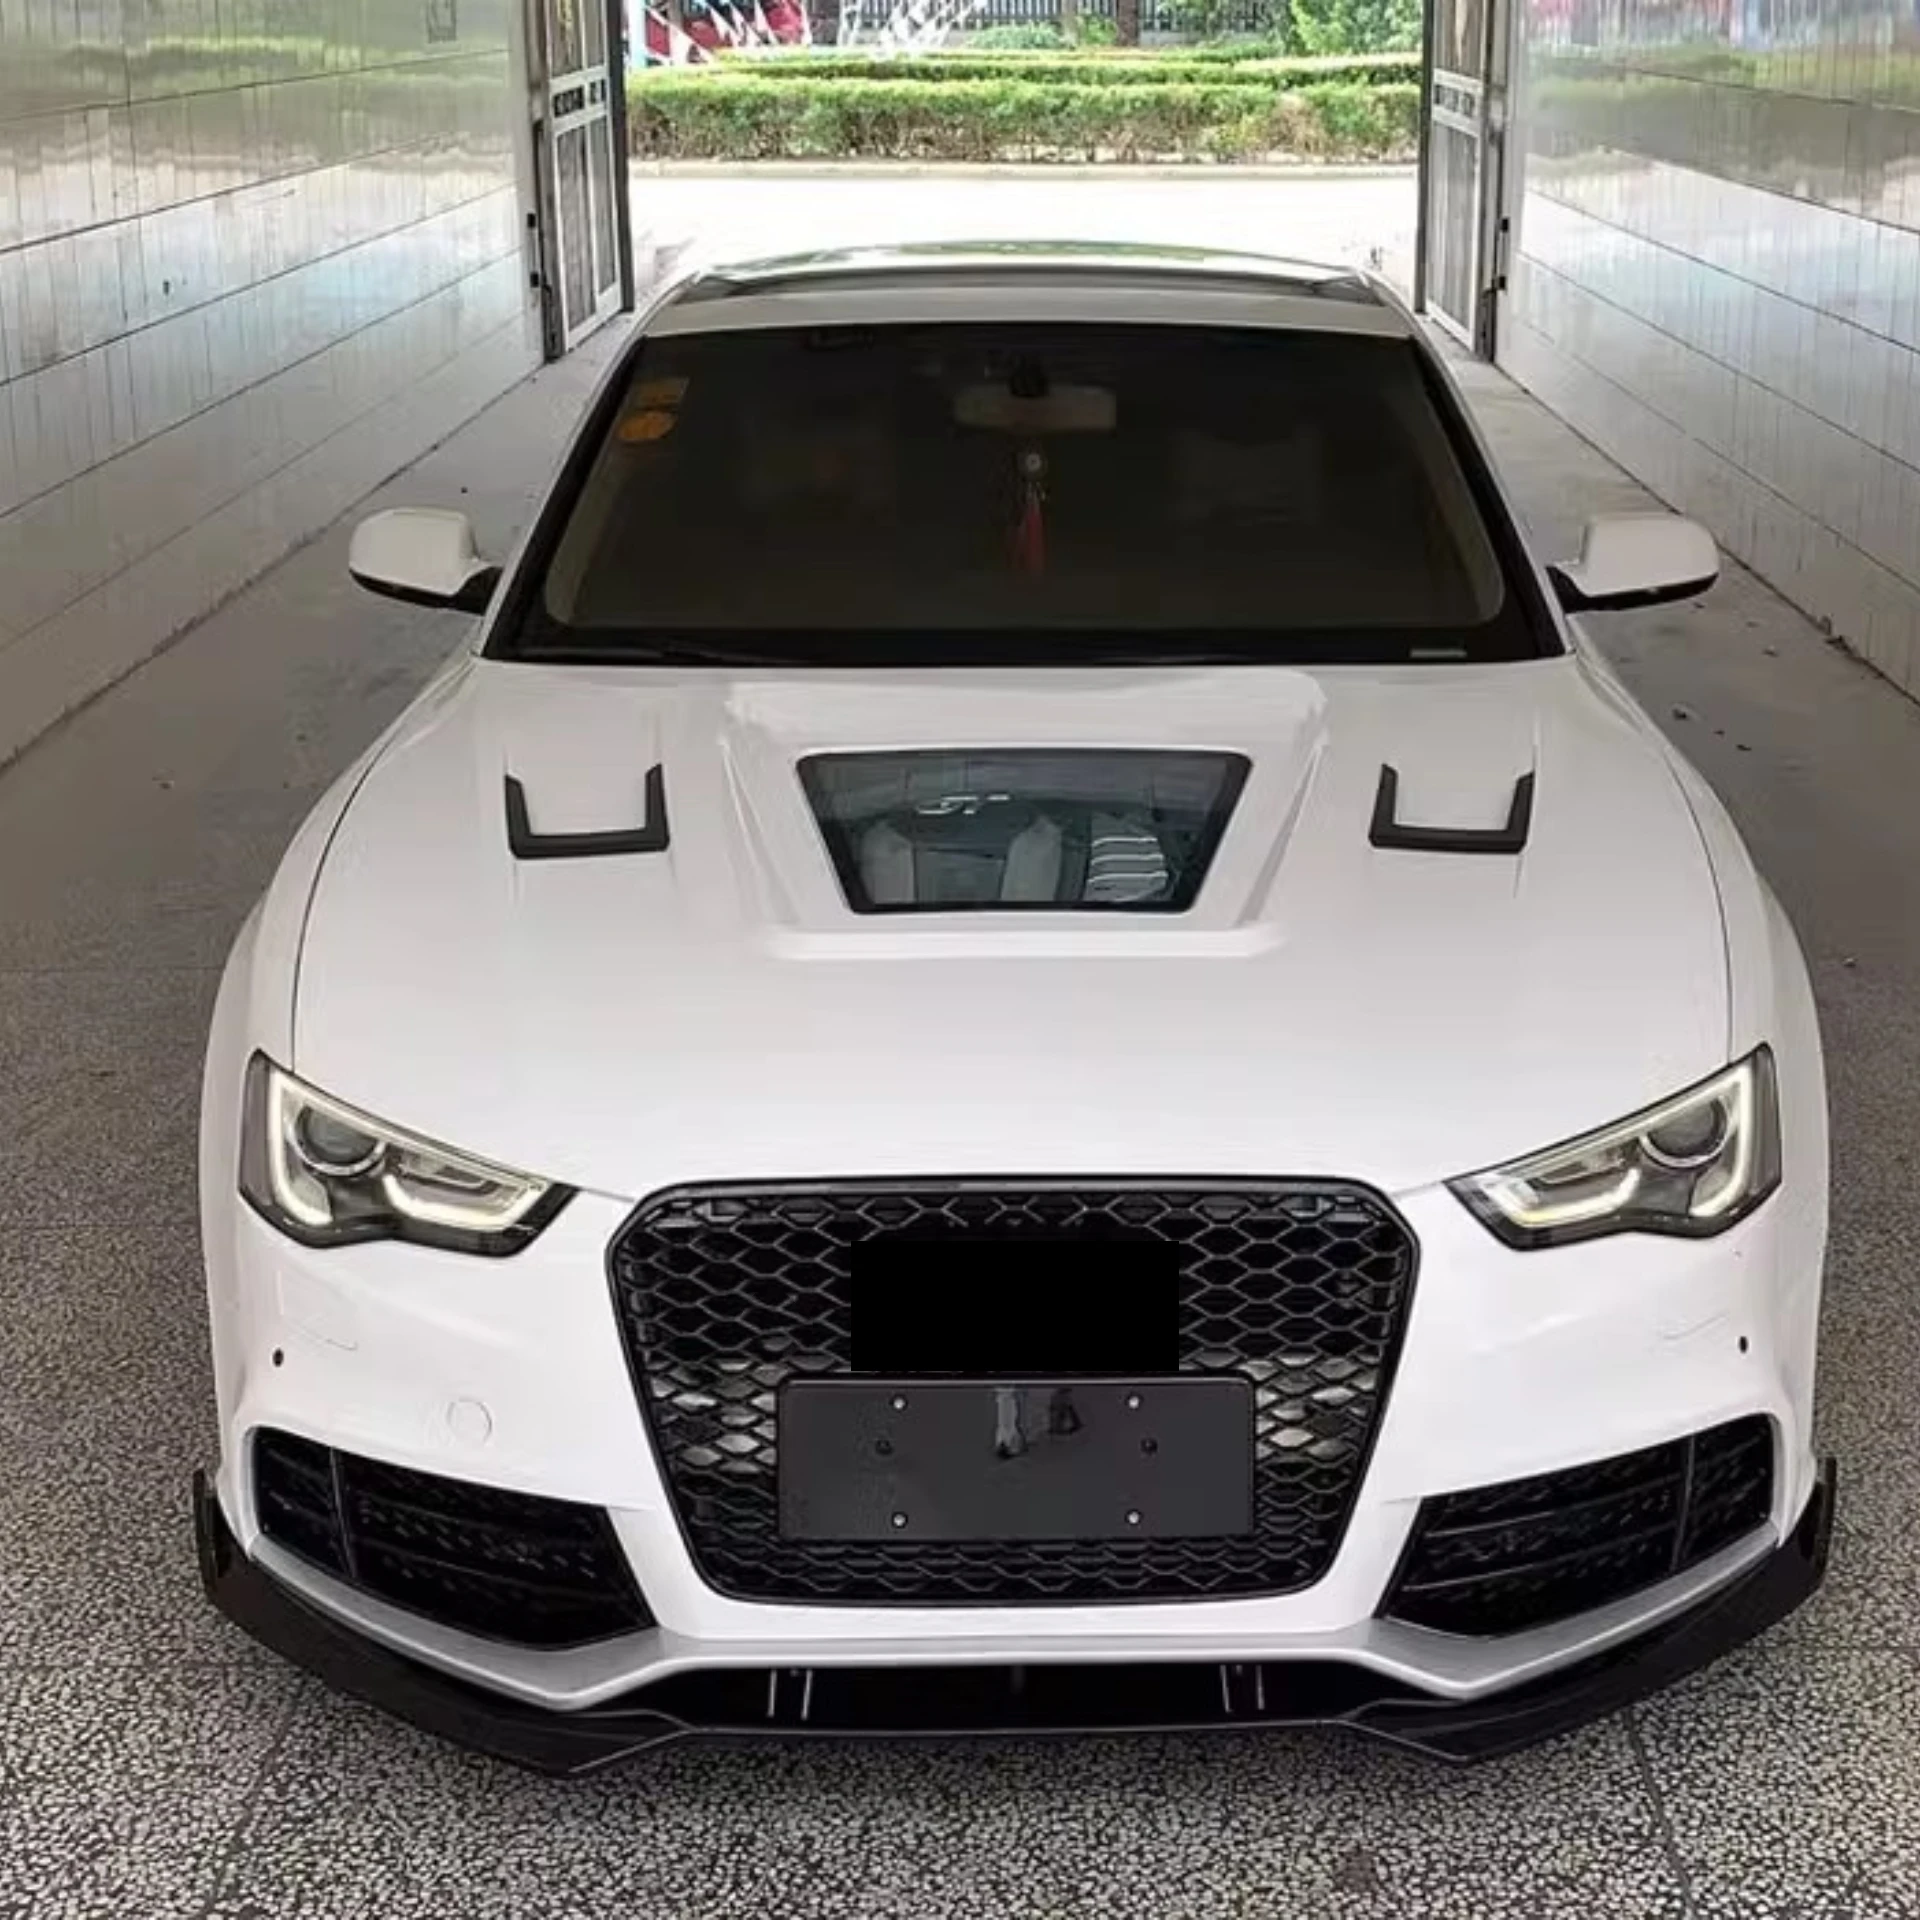 Body Kit Iron Engine Cover Transparent Hood for Audi A5 S5 RS5 13-16 Light Weight Bonnet Car Accessories